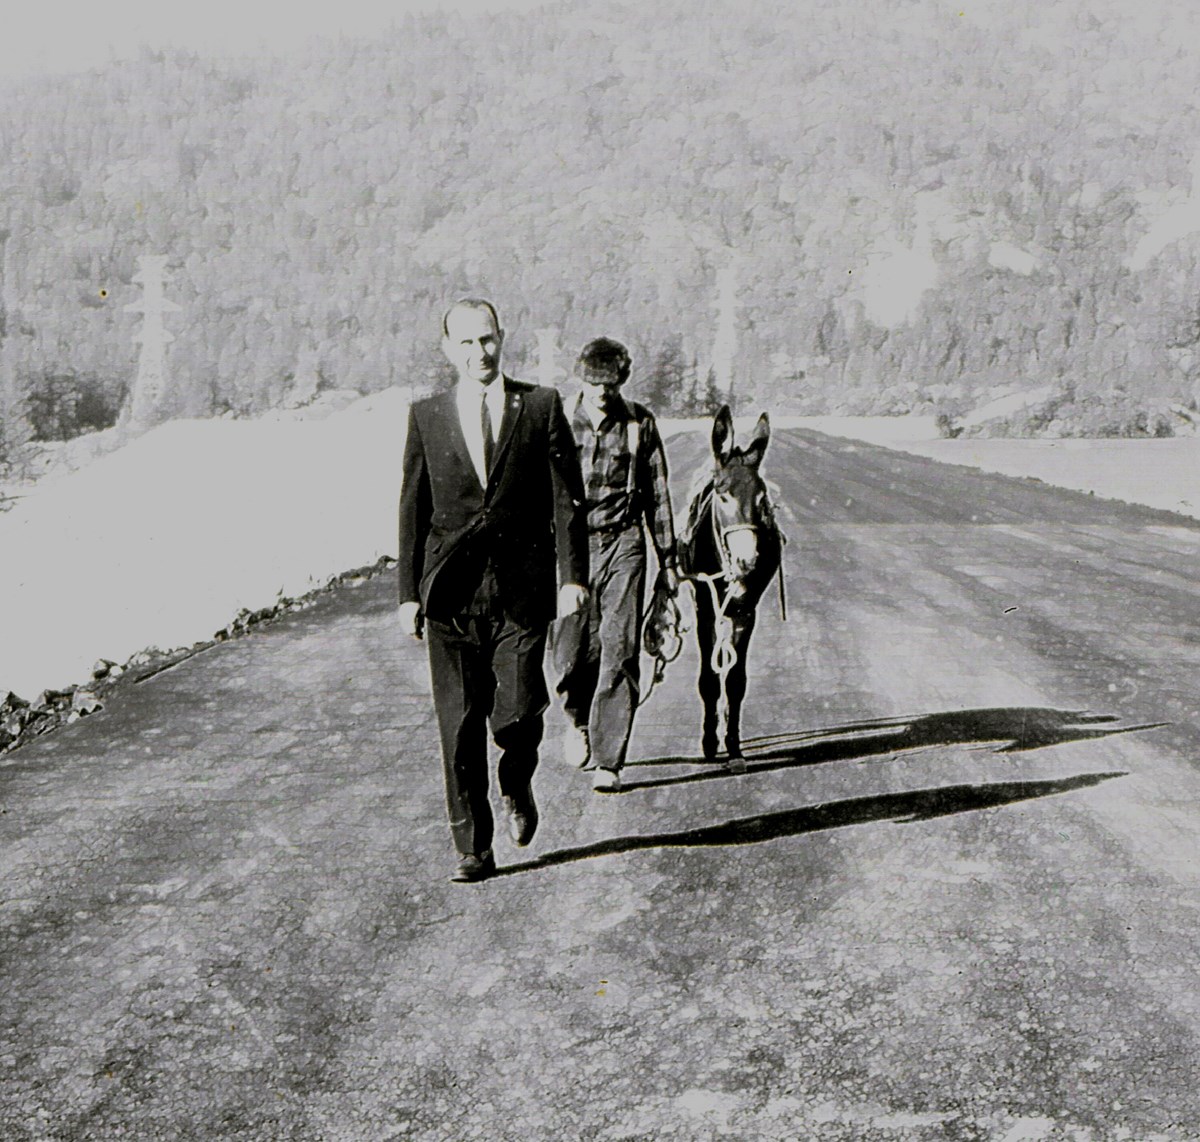 Paul McDermott and donkey, escorted by a Secret Service agent, walks across the Clair A. Hill Whiskeytown Dam during President John F. Kennedy's dam dedication ceremony. McDermott's donkey has a jug of whiskey attached to it.